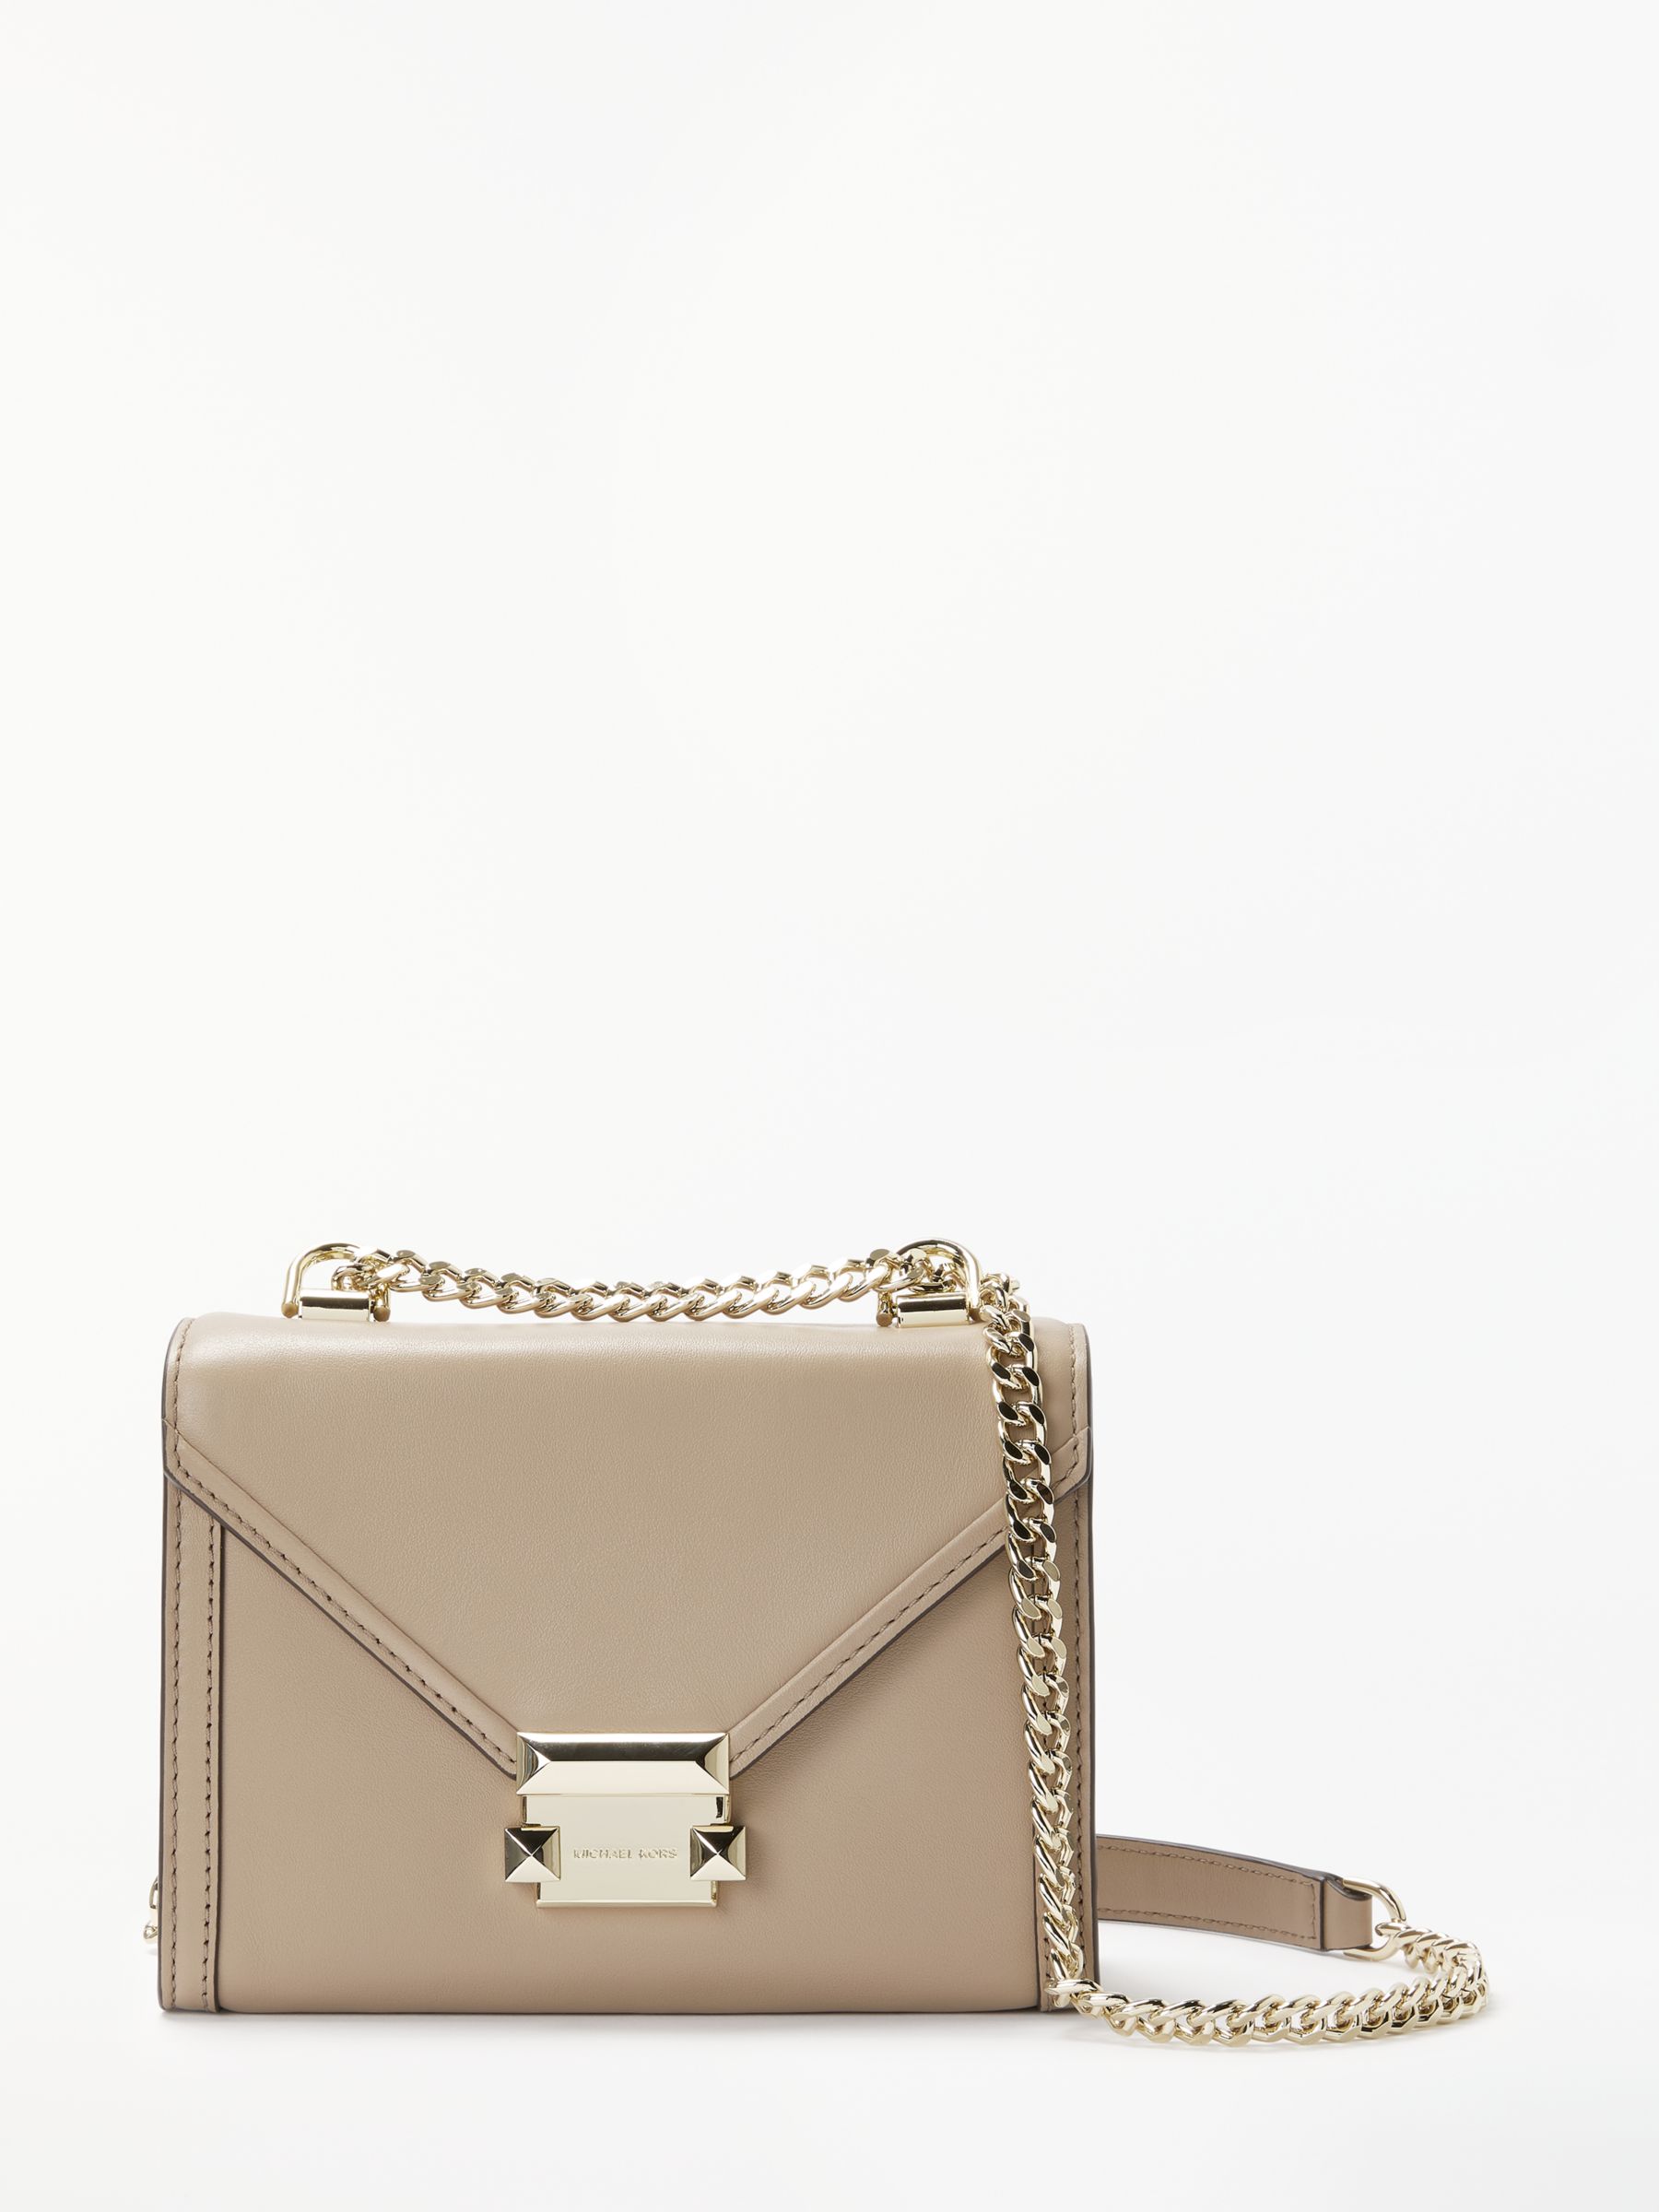 michael kors whitney small chain shoulder tote